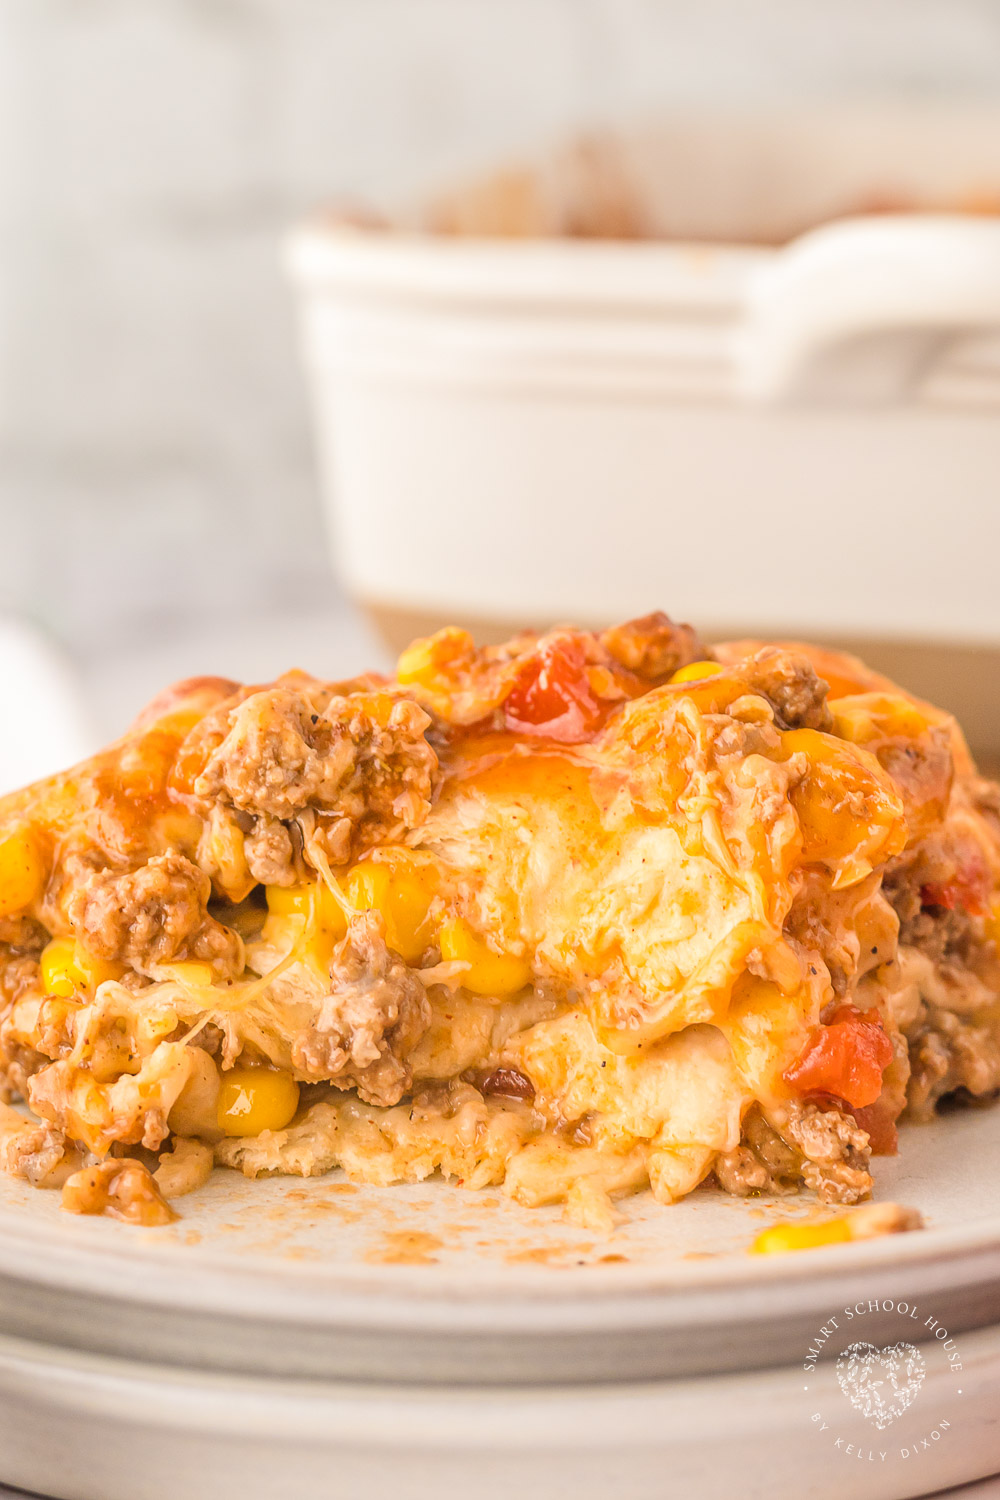 Enchilada Casserole is a comforting shortcut recipe for classic enchiladas featuring ground beef, enchilada sauce, and lots of melted cheese.